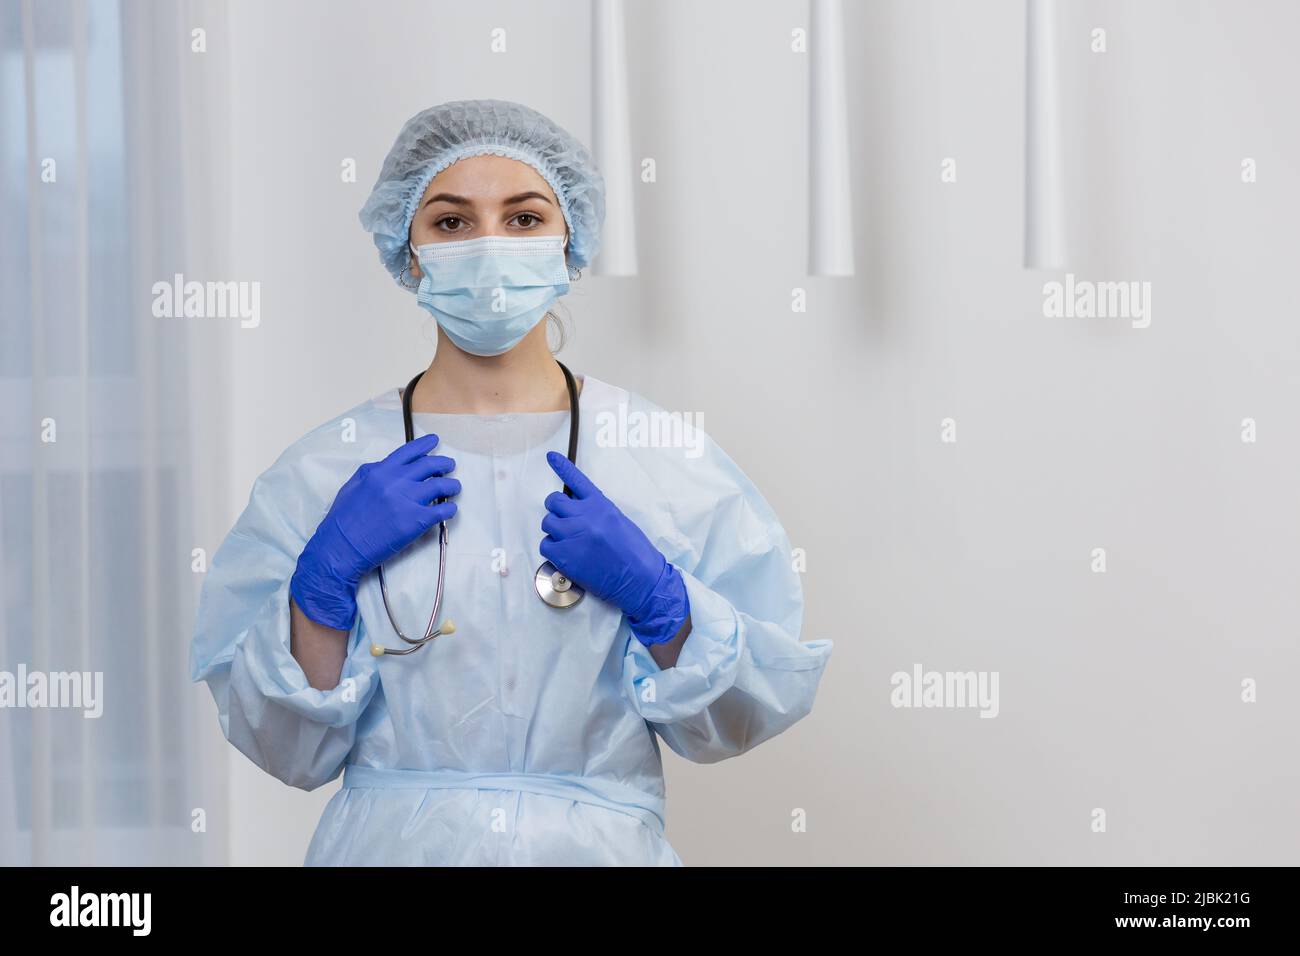 Portrait of young female doctor in mask, surgical gown and hat, standing holding stethoscope, looking at camera Stock Photo